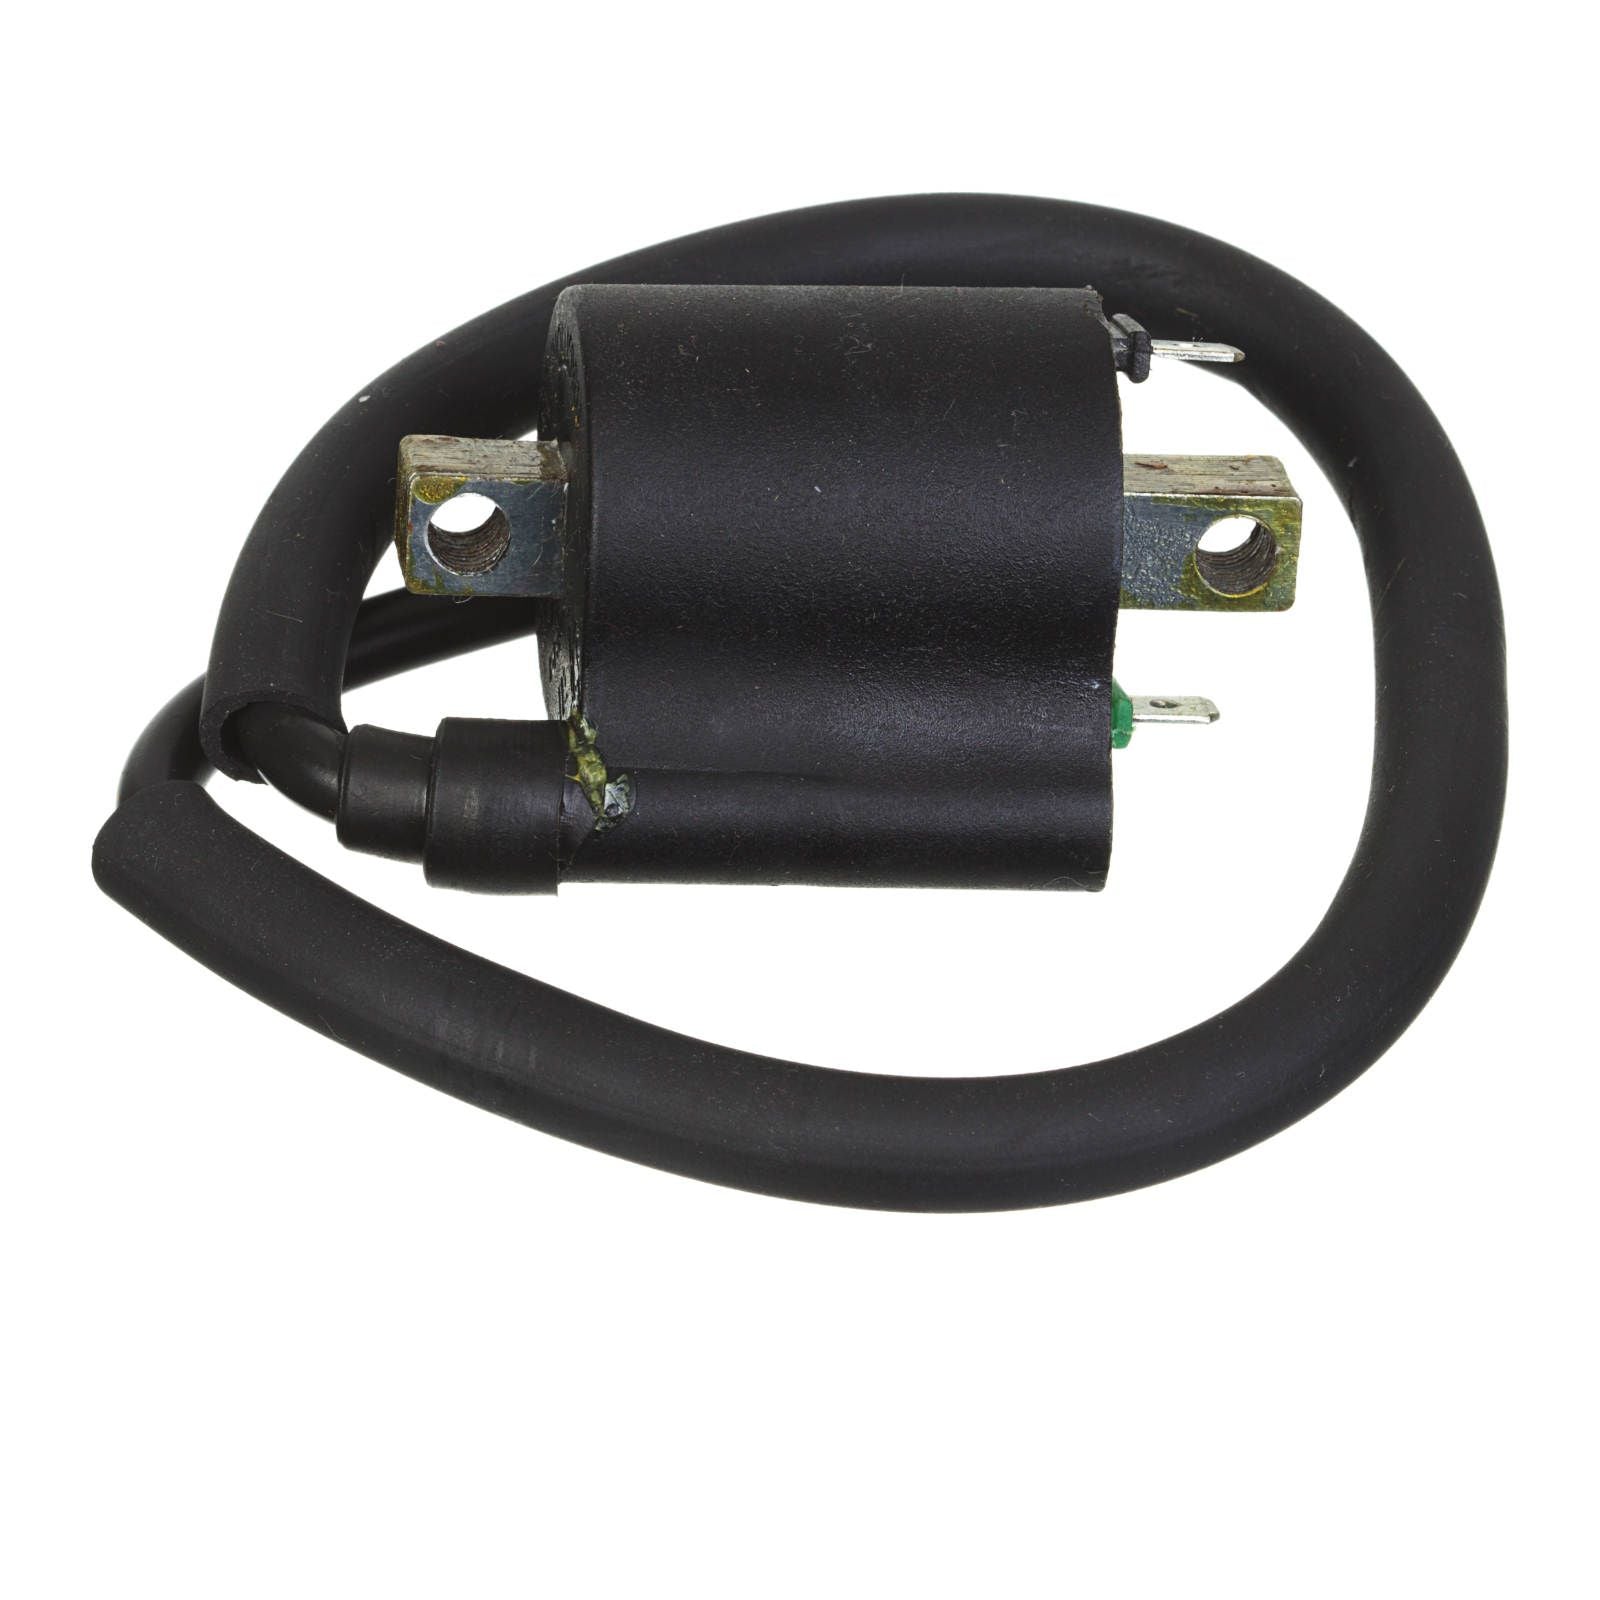 New WHITES Electrical Ignition Coil 12V #WPELC04120152